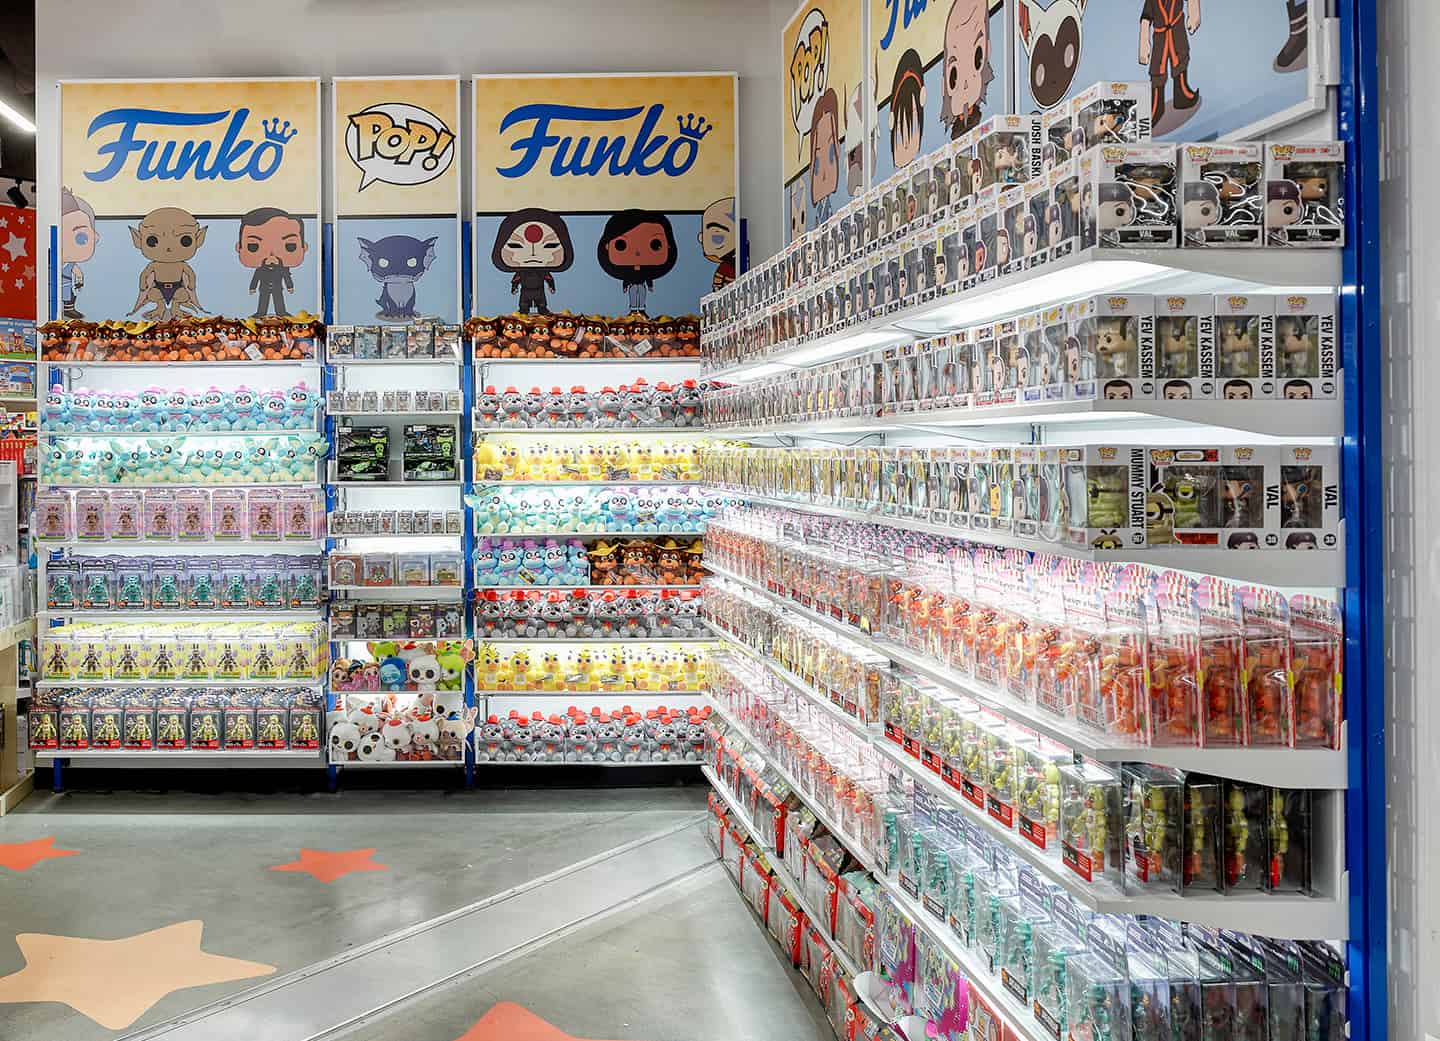 Toys "R" Us shelves with lighting